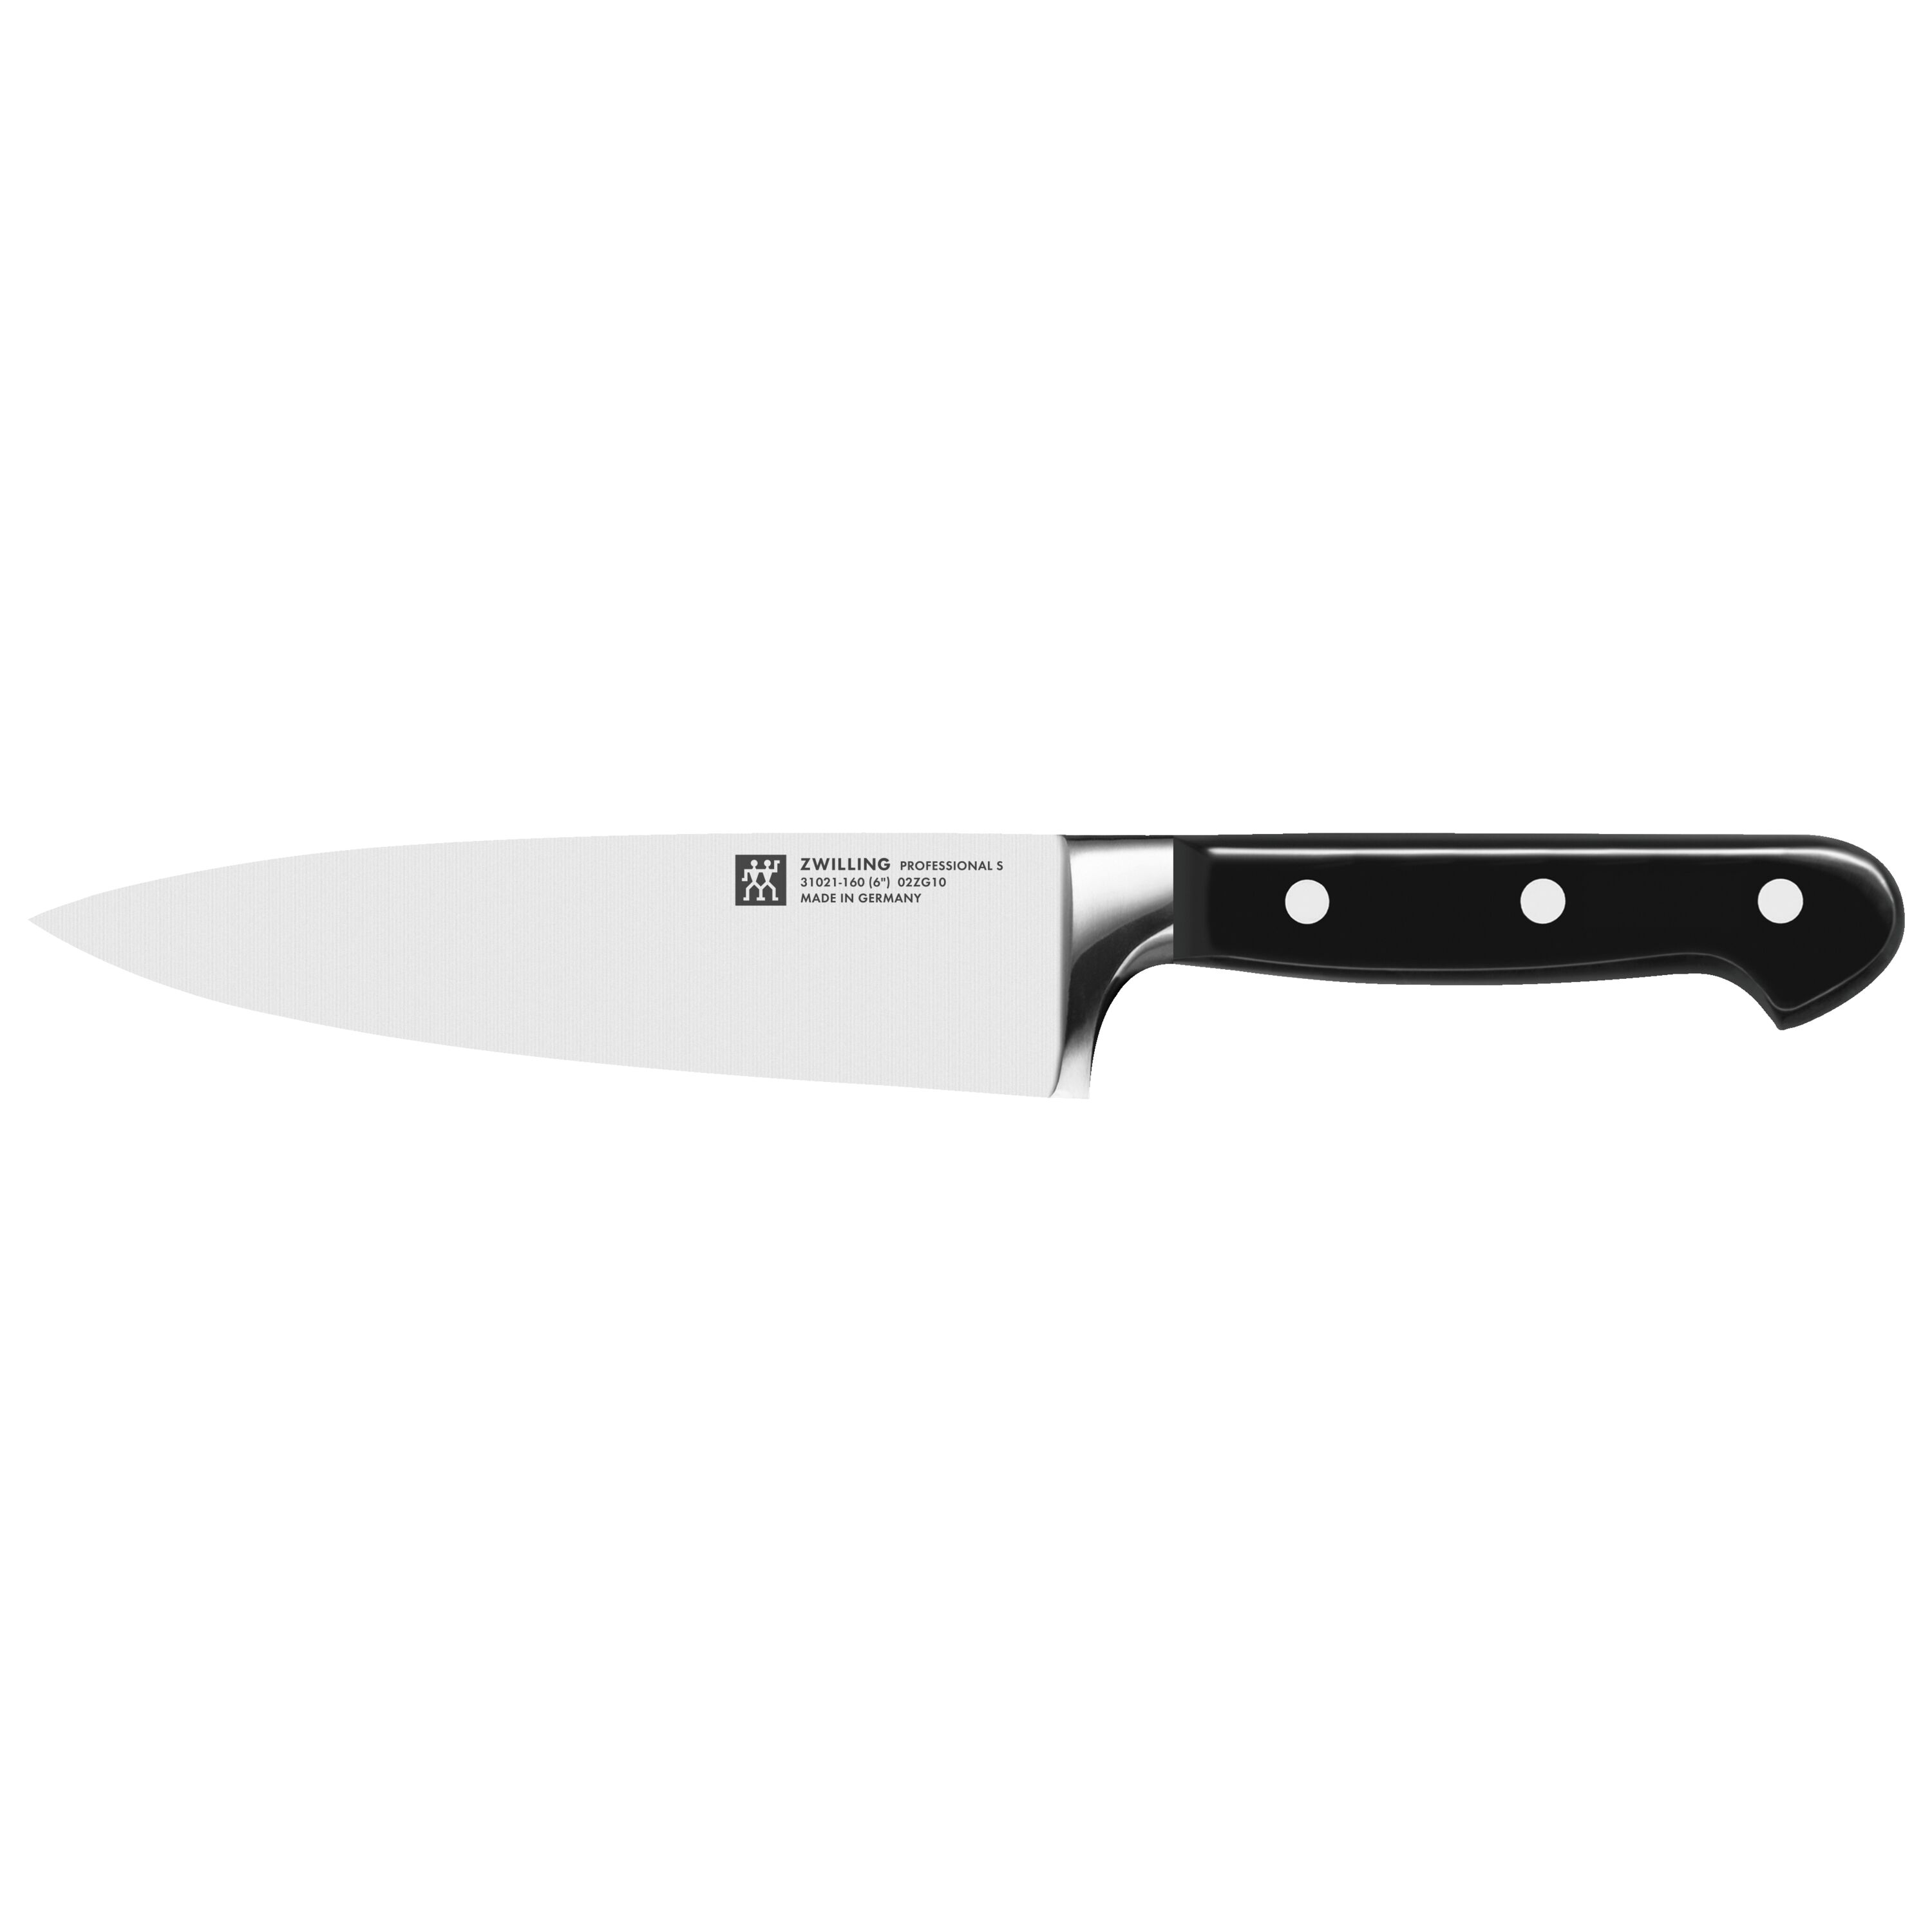 ZWILLING J.A. Henckels TWIN Signature 8 Chef's Knife 